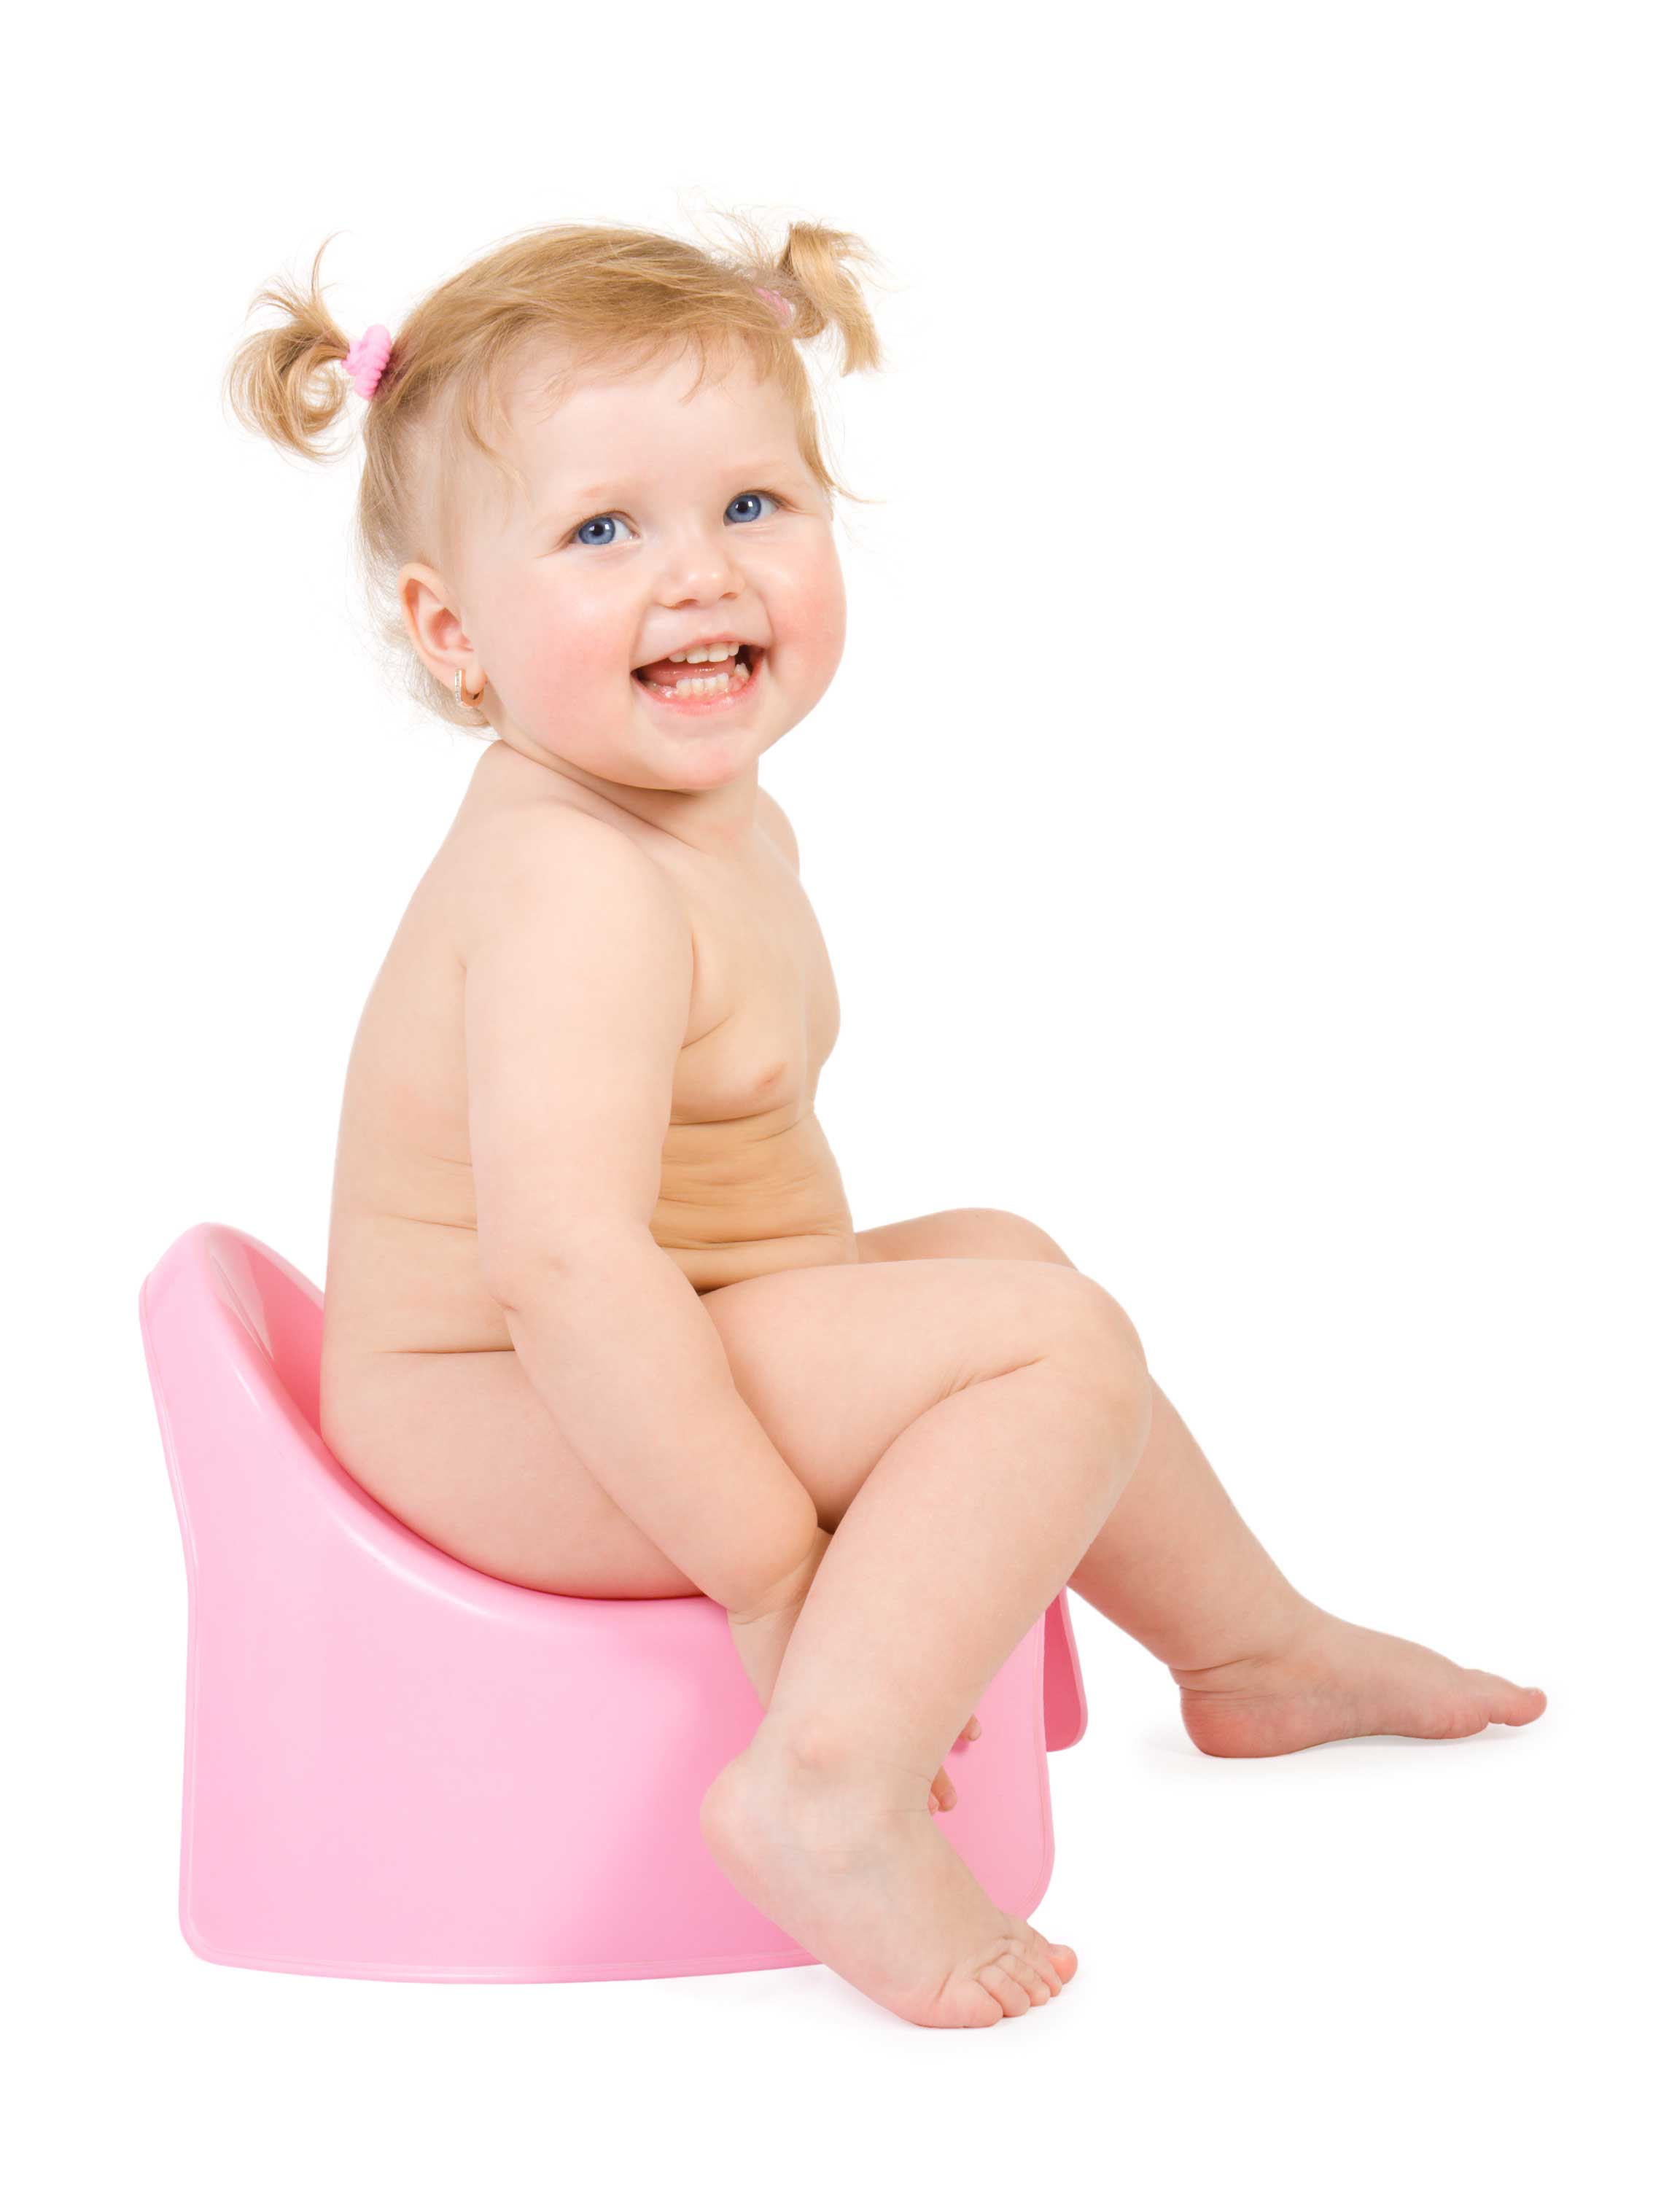 How To Get Your Kids To Poop - Toddler Constipation